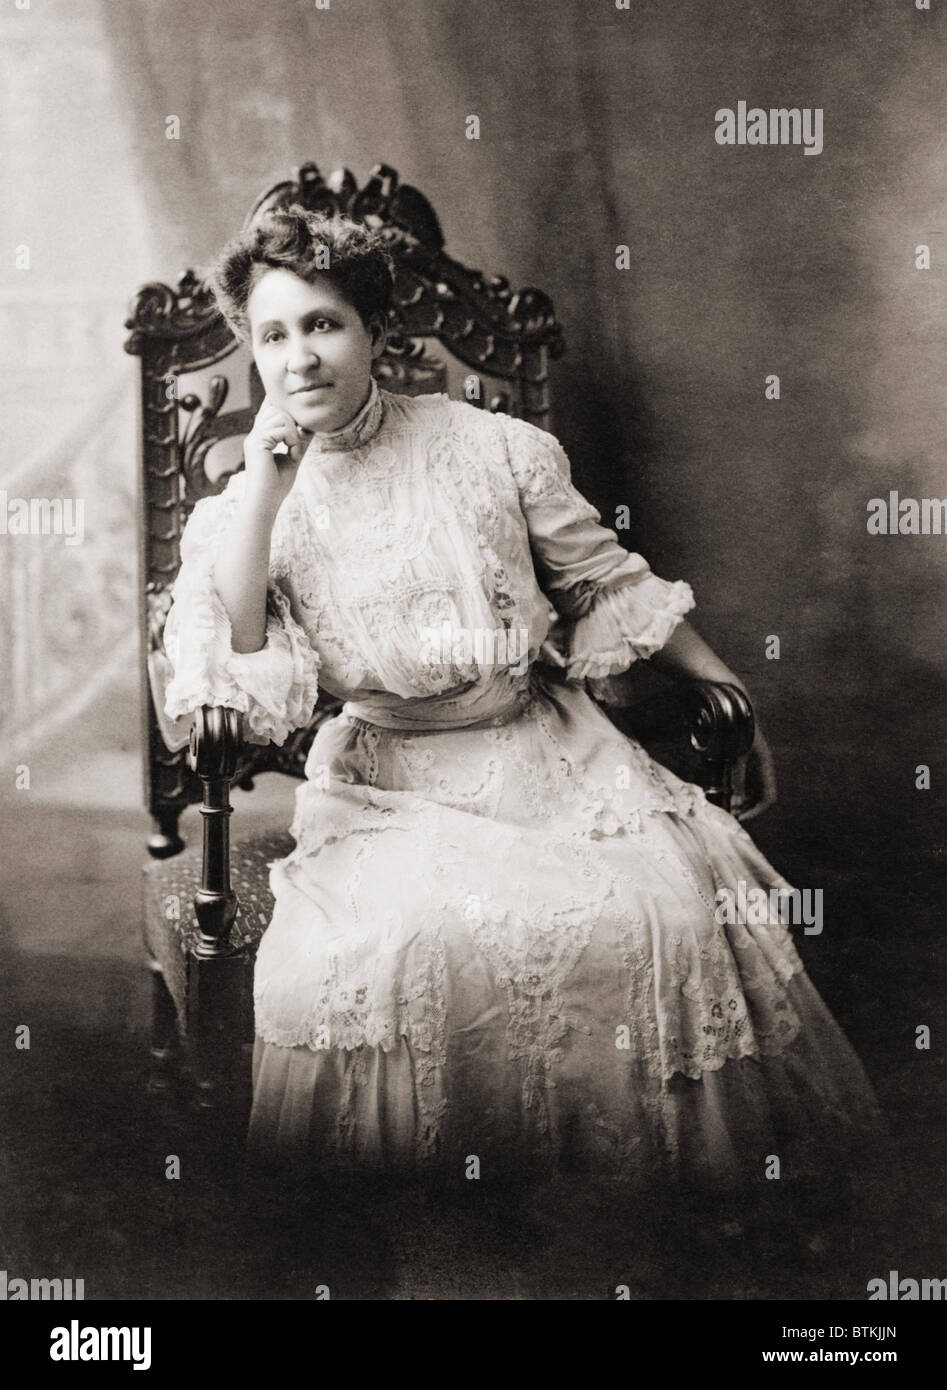 Mary Church Terrell (1863-July 1954) was an African American writer and socially prominent Washington D.C. civil rights activist. She personally lobbied U.S. Presidents during the Jim Crow era. Ca. 1895. Stock Photo